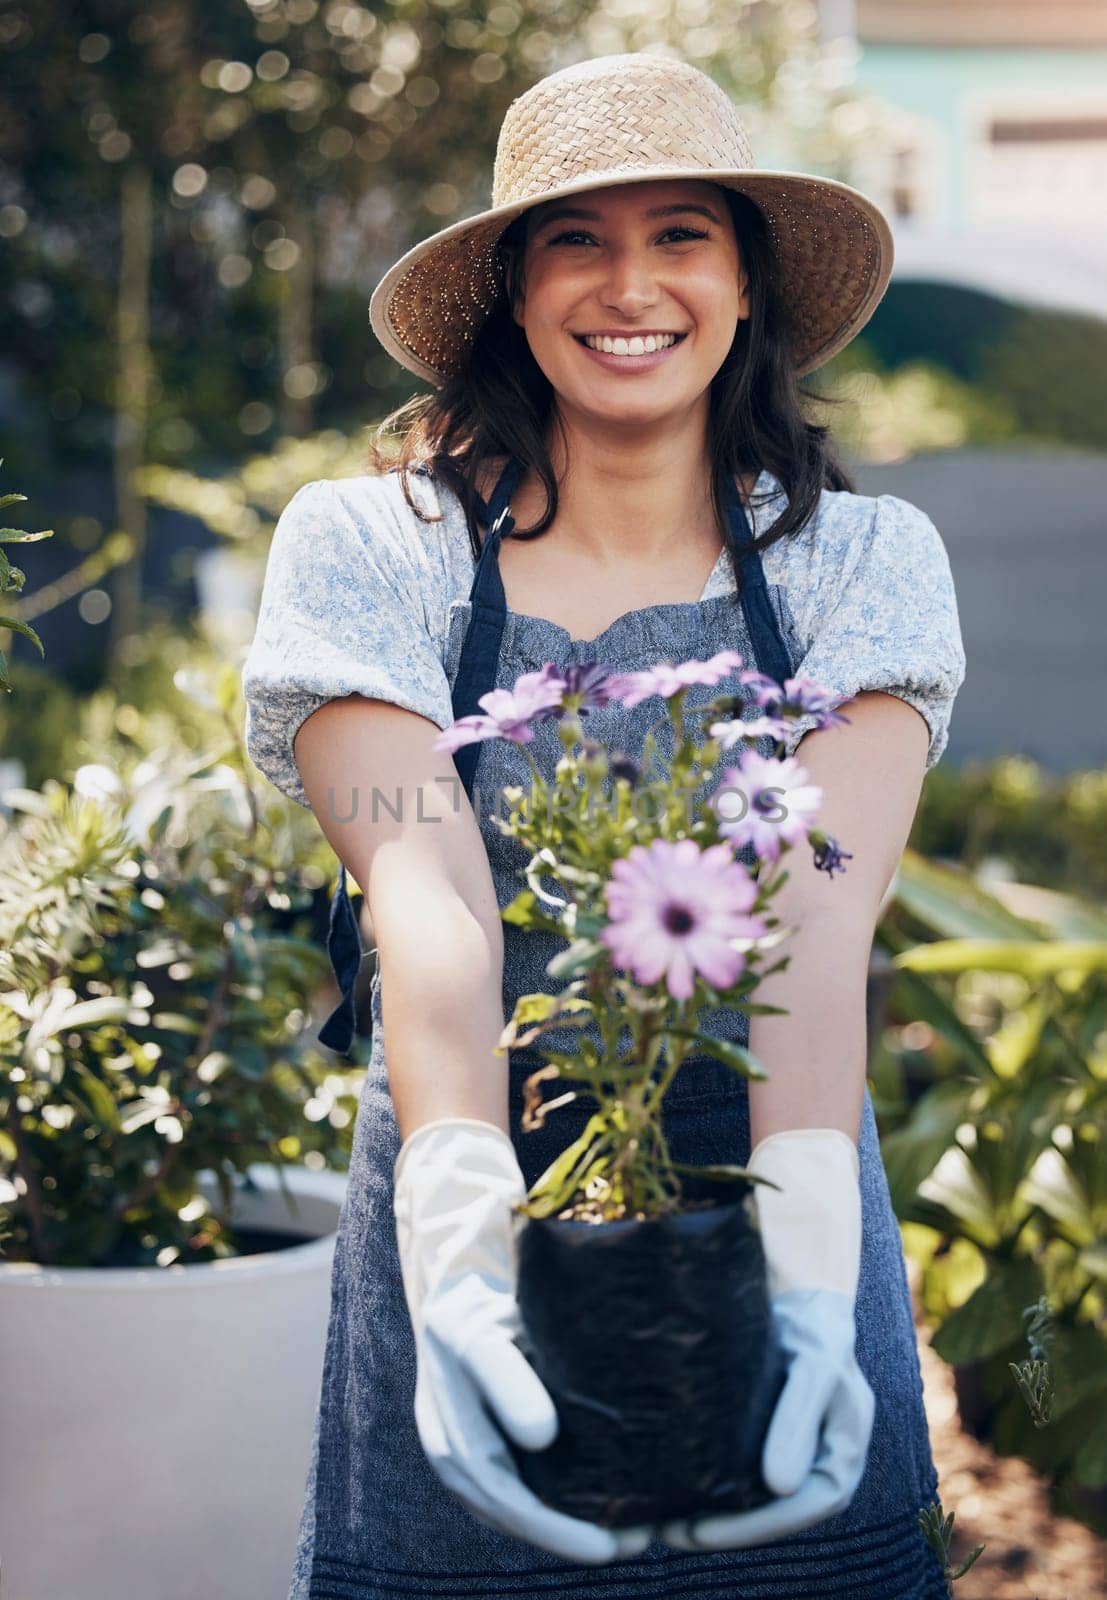 Flowers, portrait and happy woman gardening with pot plants for growth, development and nursery service. Gardener, florist and eco friendly farming for nature, horticulture and floral sustainability.